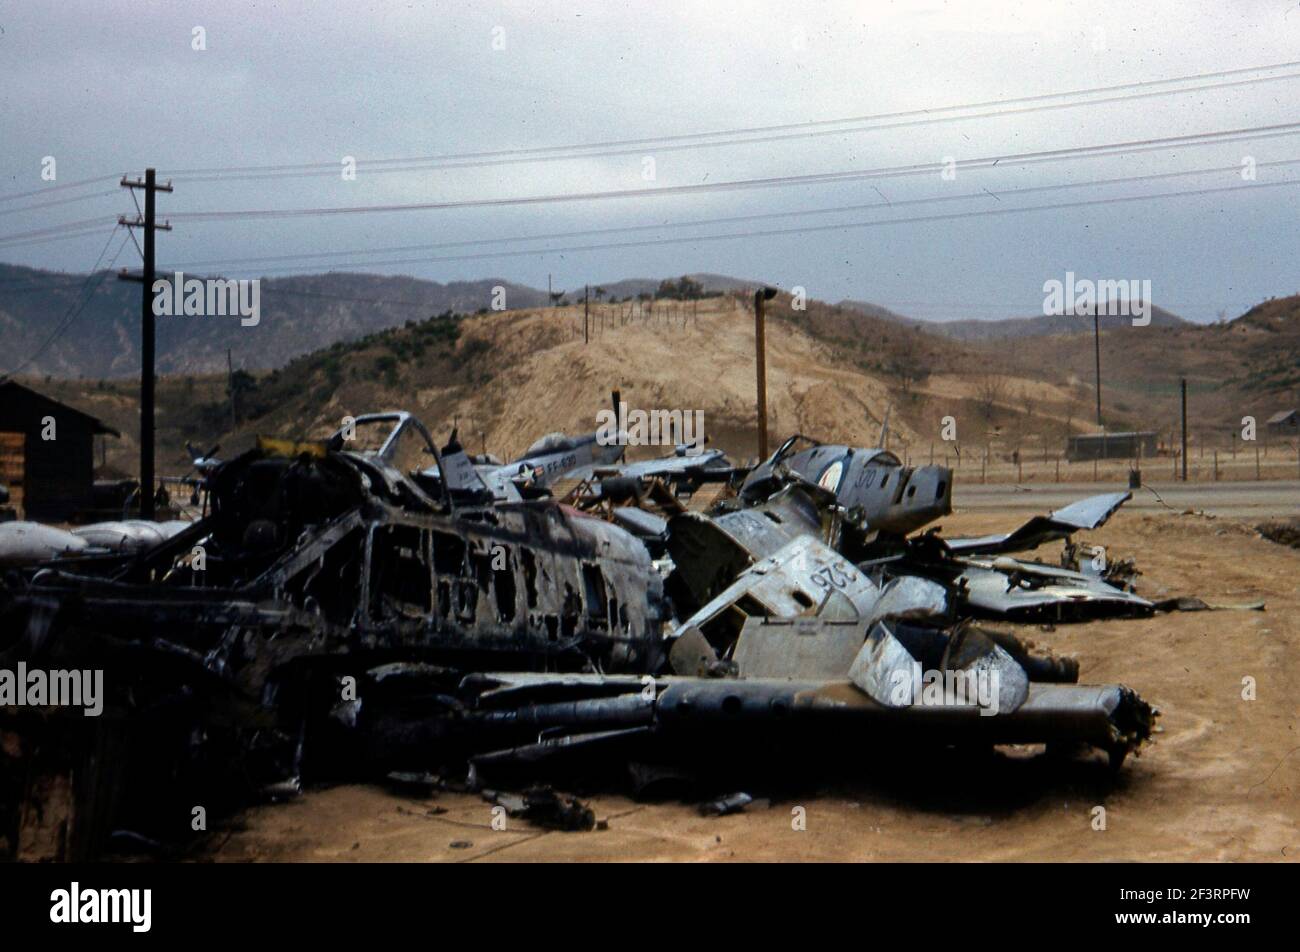 The charred remains of a North American F051 Mustang in the 'bone yard'. The parts of other F-51 Mustangs and Mk. IVs appear. Serial numbers KM326 and KM370 are visible on scraps from South African Air Force aircraft. Stock Photo